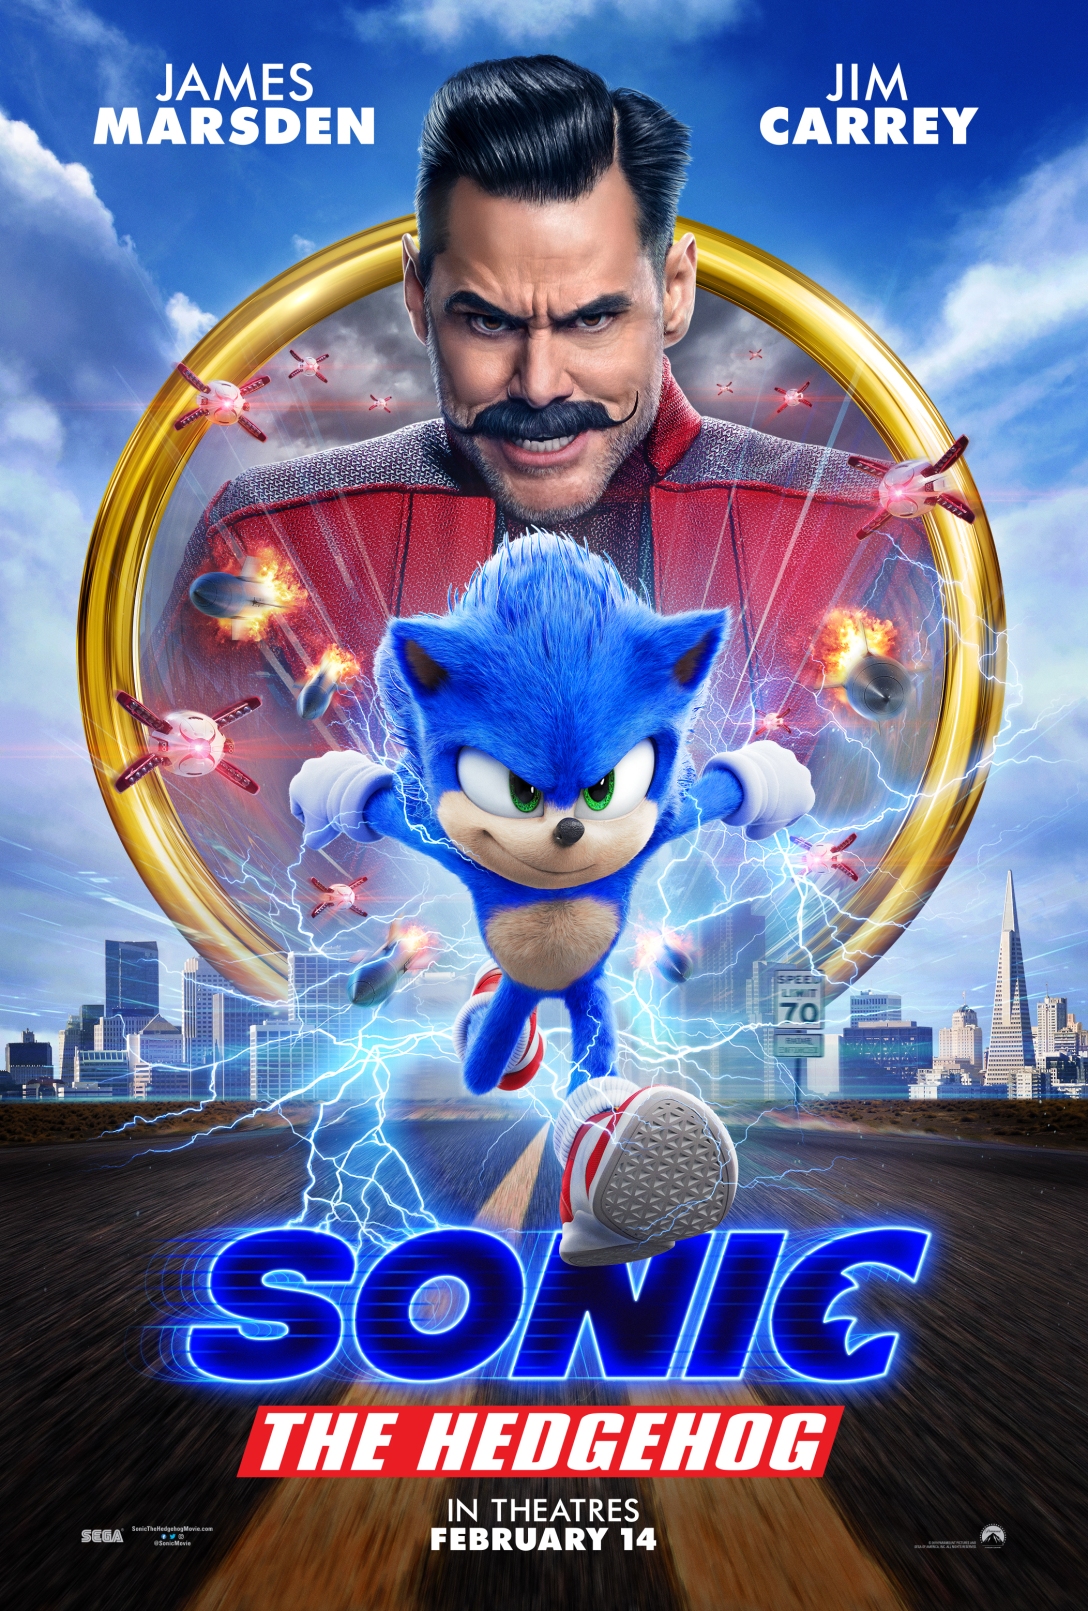 Sonic the Hedgehog - movie poster - property of Paramount Pictures, Sega, and others - from https://www.imdb.com/title/tt3794354/mediaviewer/rm3381038849